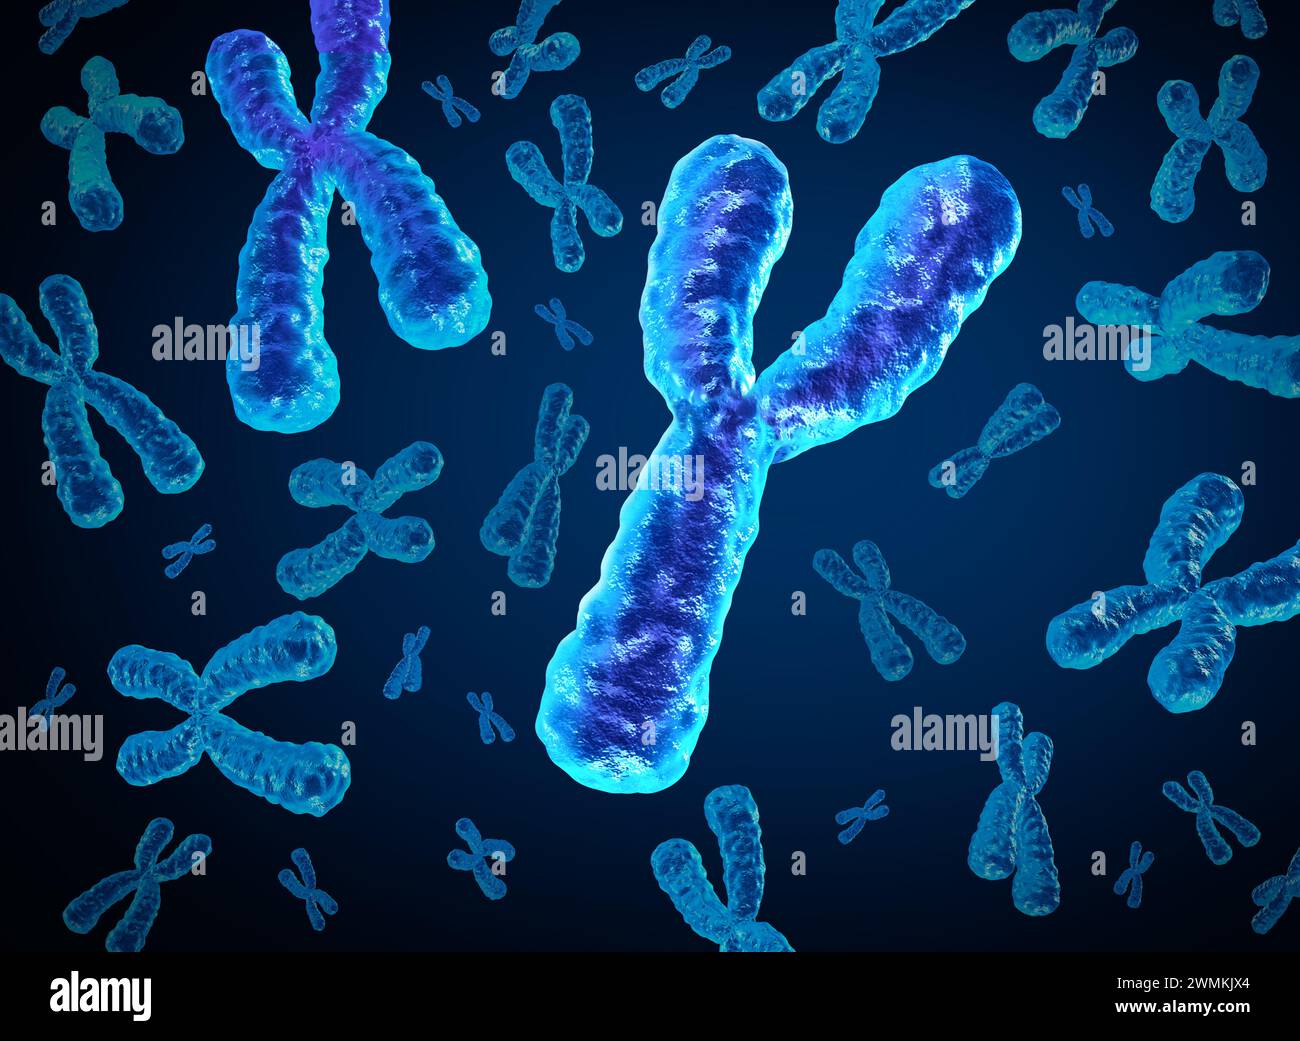 Y Chromosome Disappearing and Y-Chromosomes dying out as a concept for a human biology x structure containing dna genetic information as a medical Stock Photo